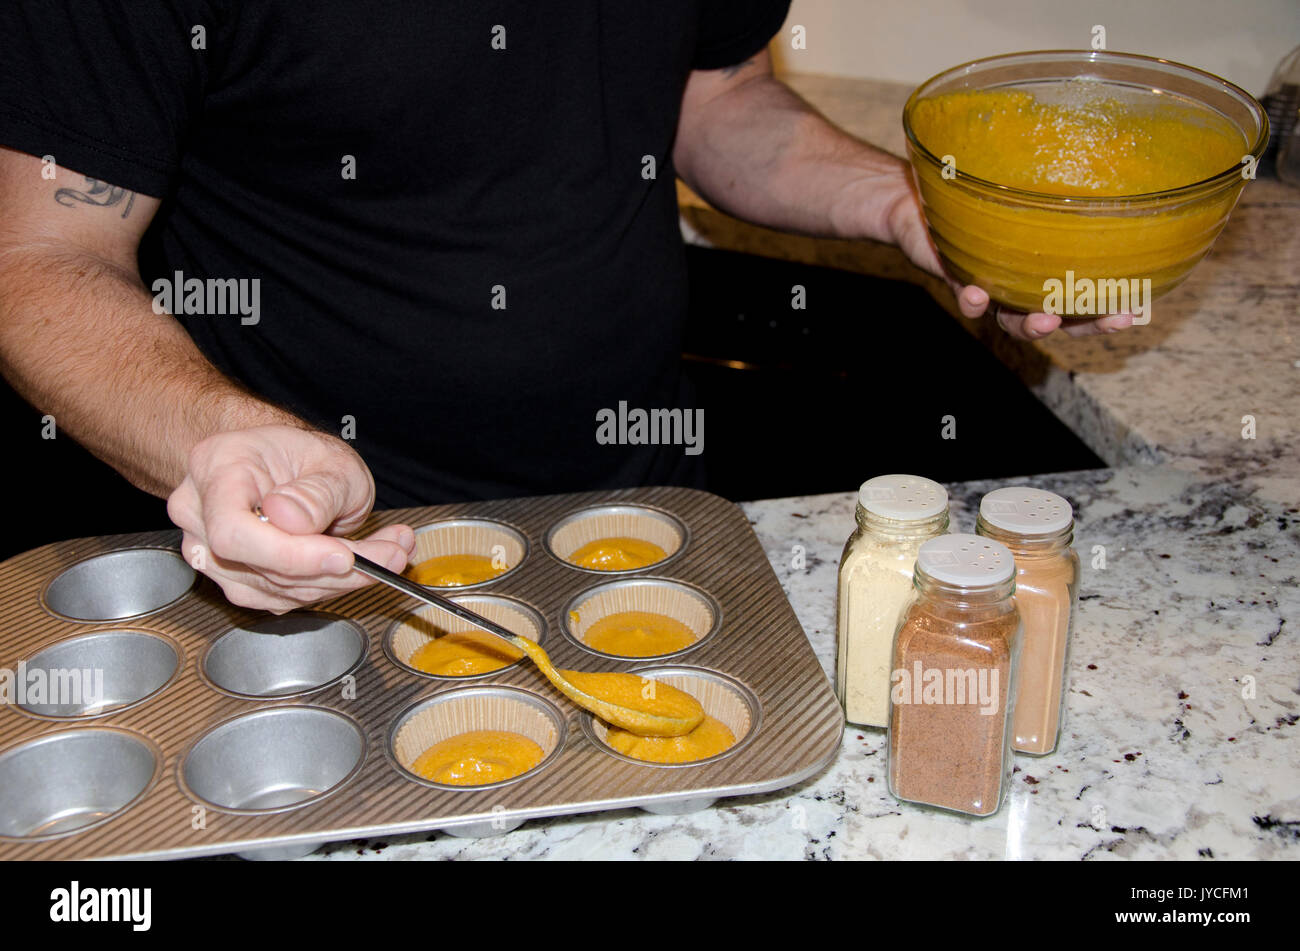 Close up of man baking pumpkin muffins at home for the holidays. Photo only shows the waist to neck no face is shown. Stock Photo